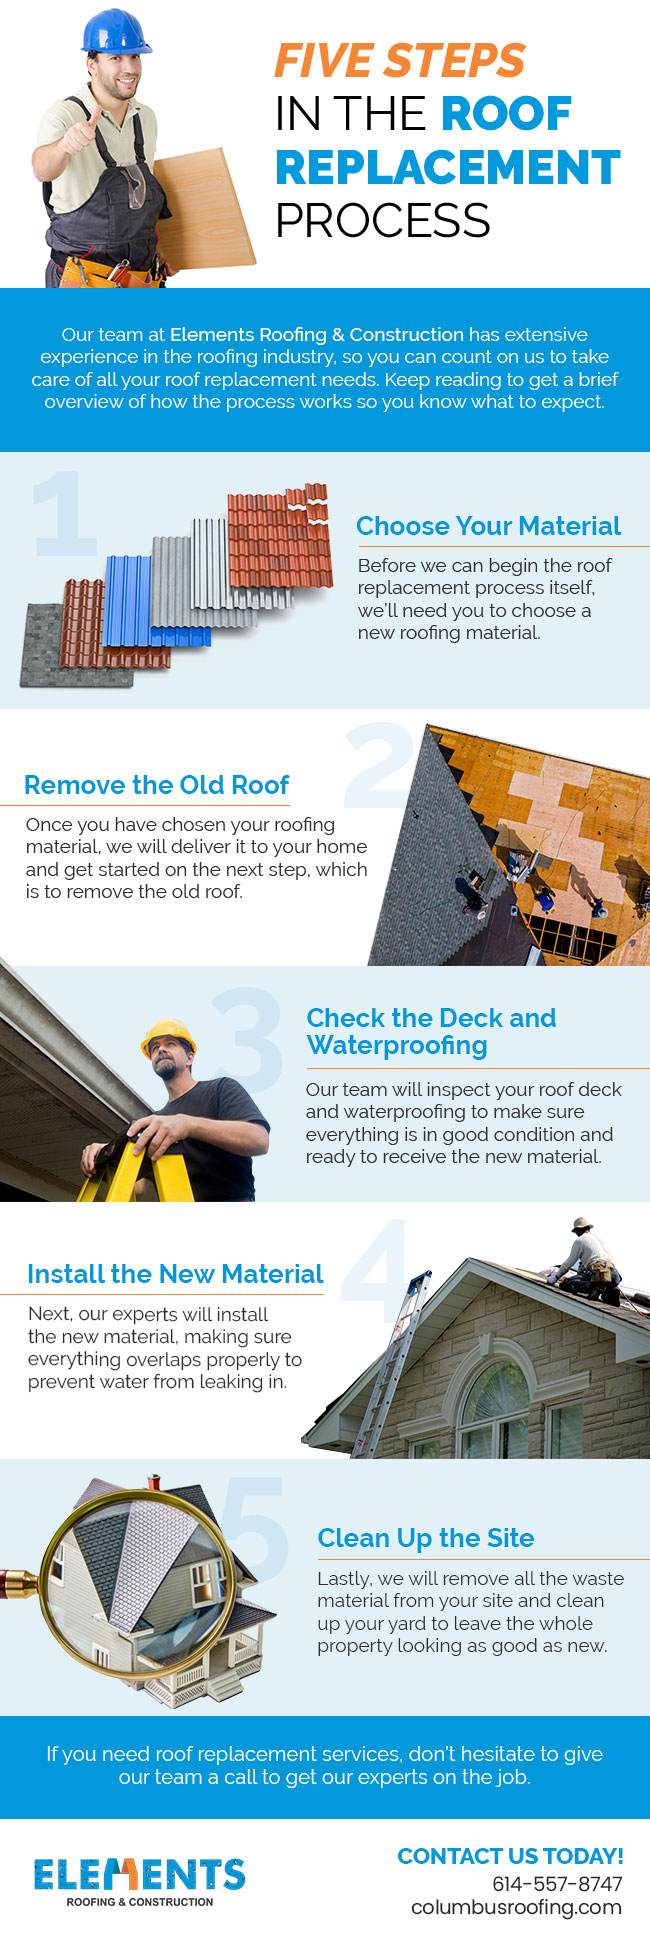 Five Steps in the Roof Replacement Process